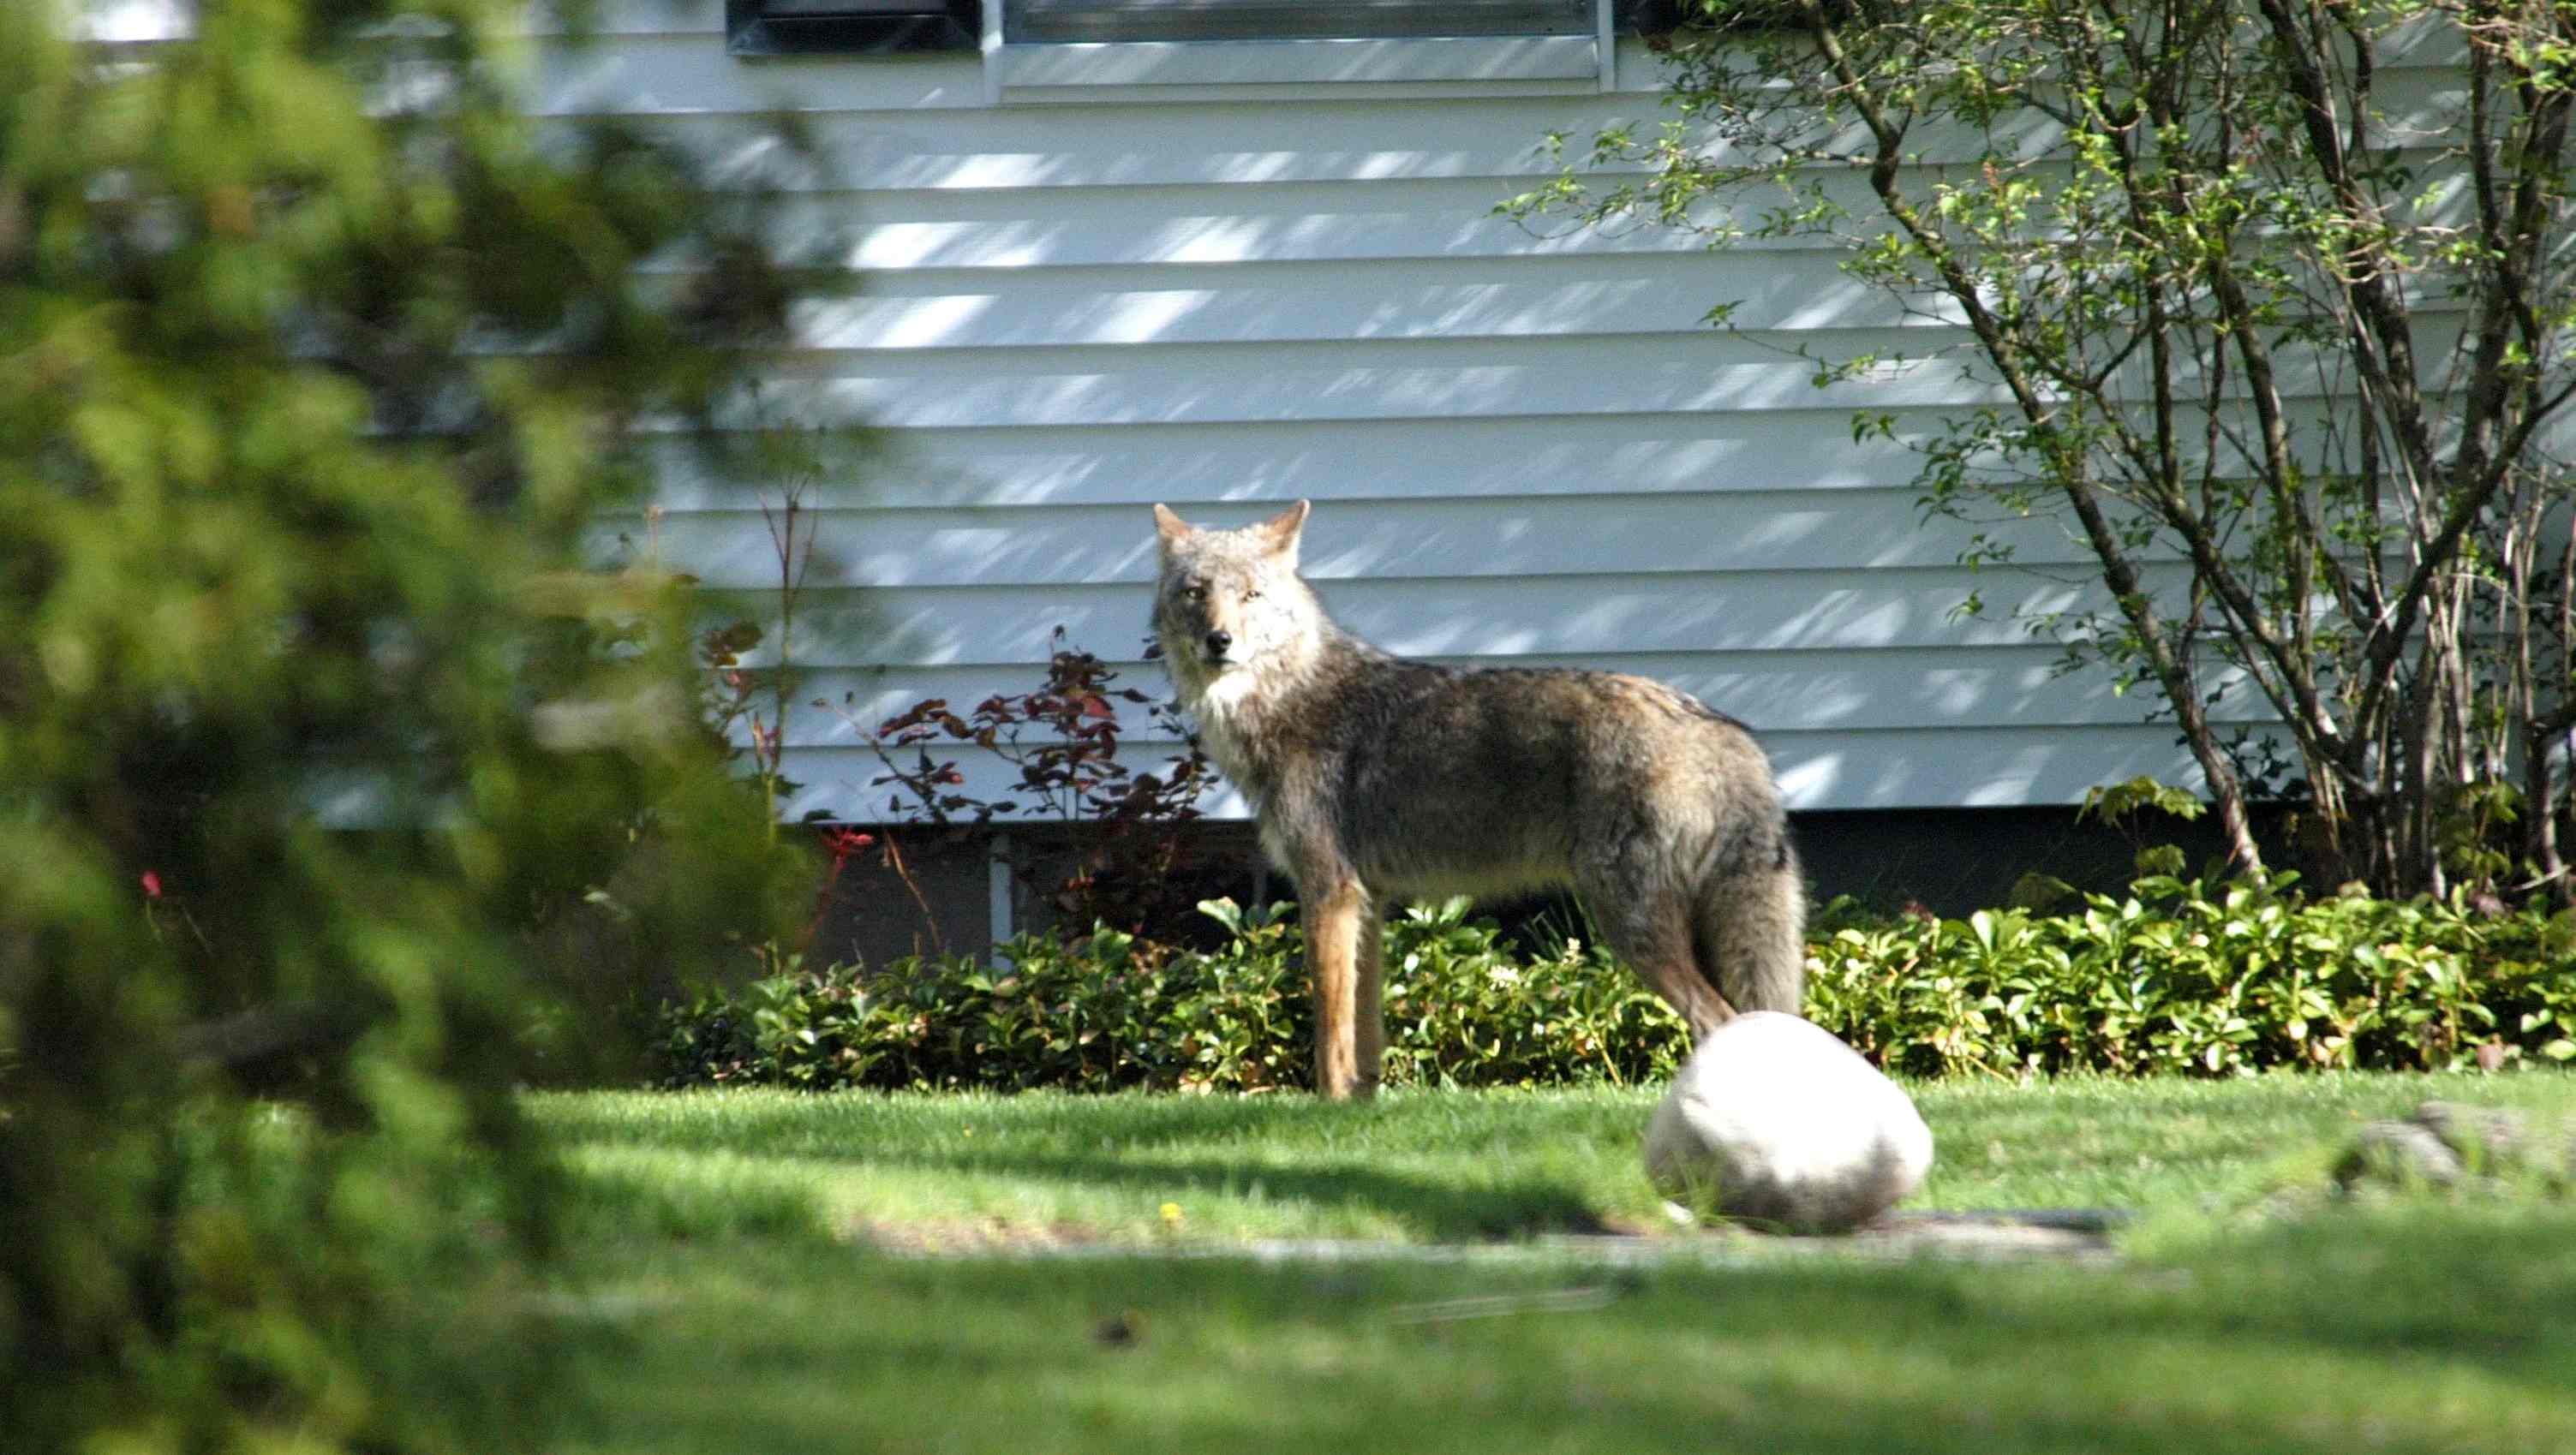 How To Catch A Coyote In Your Backyard